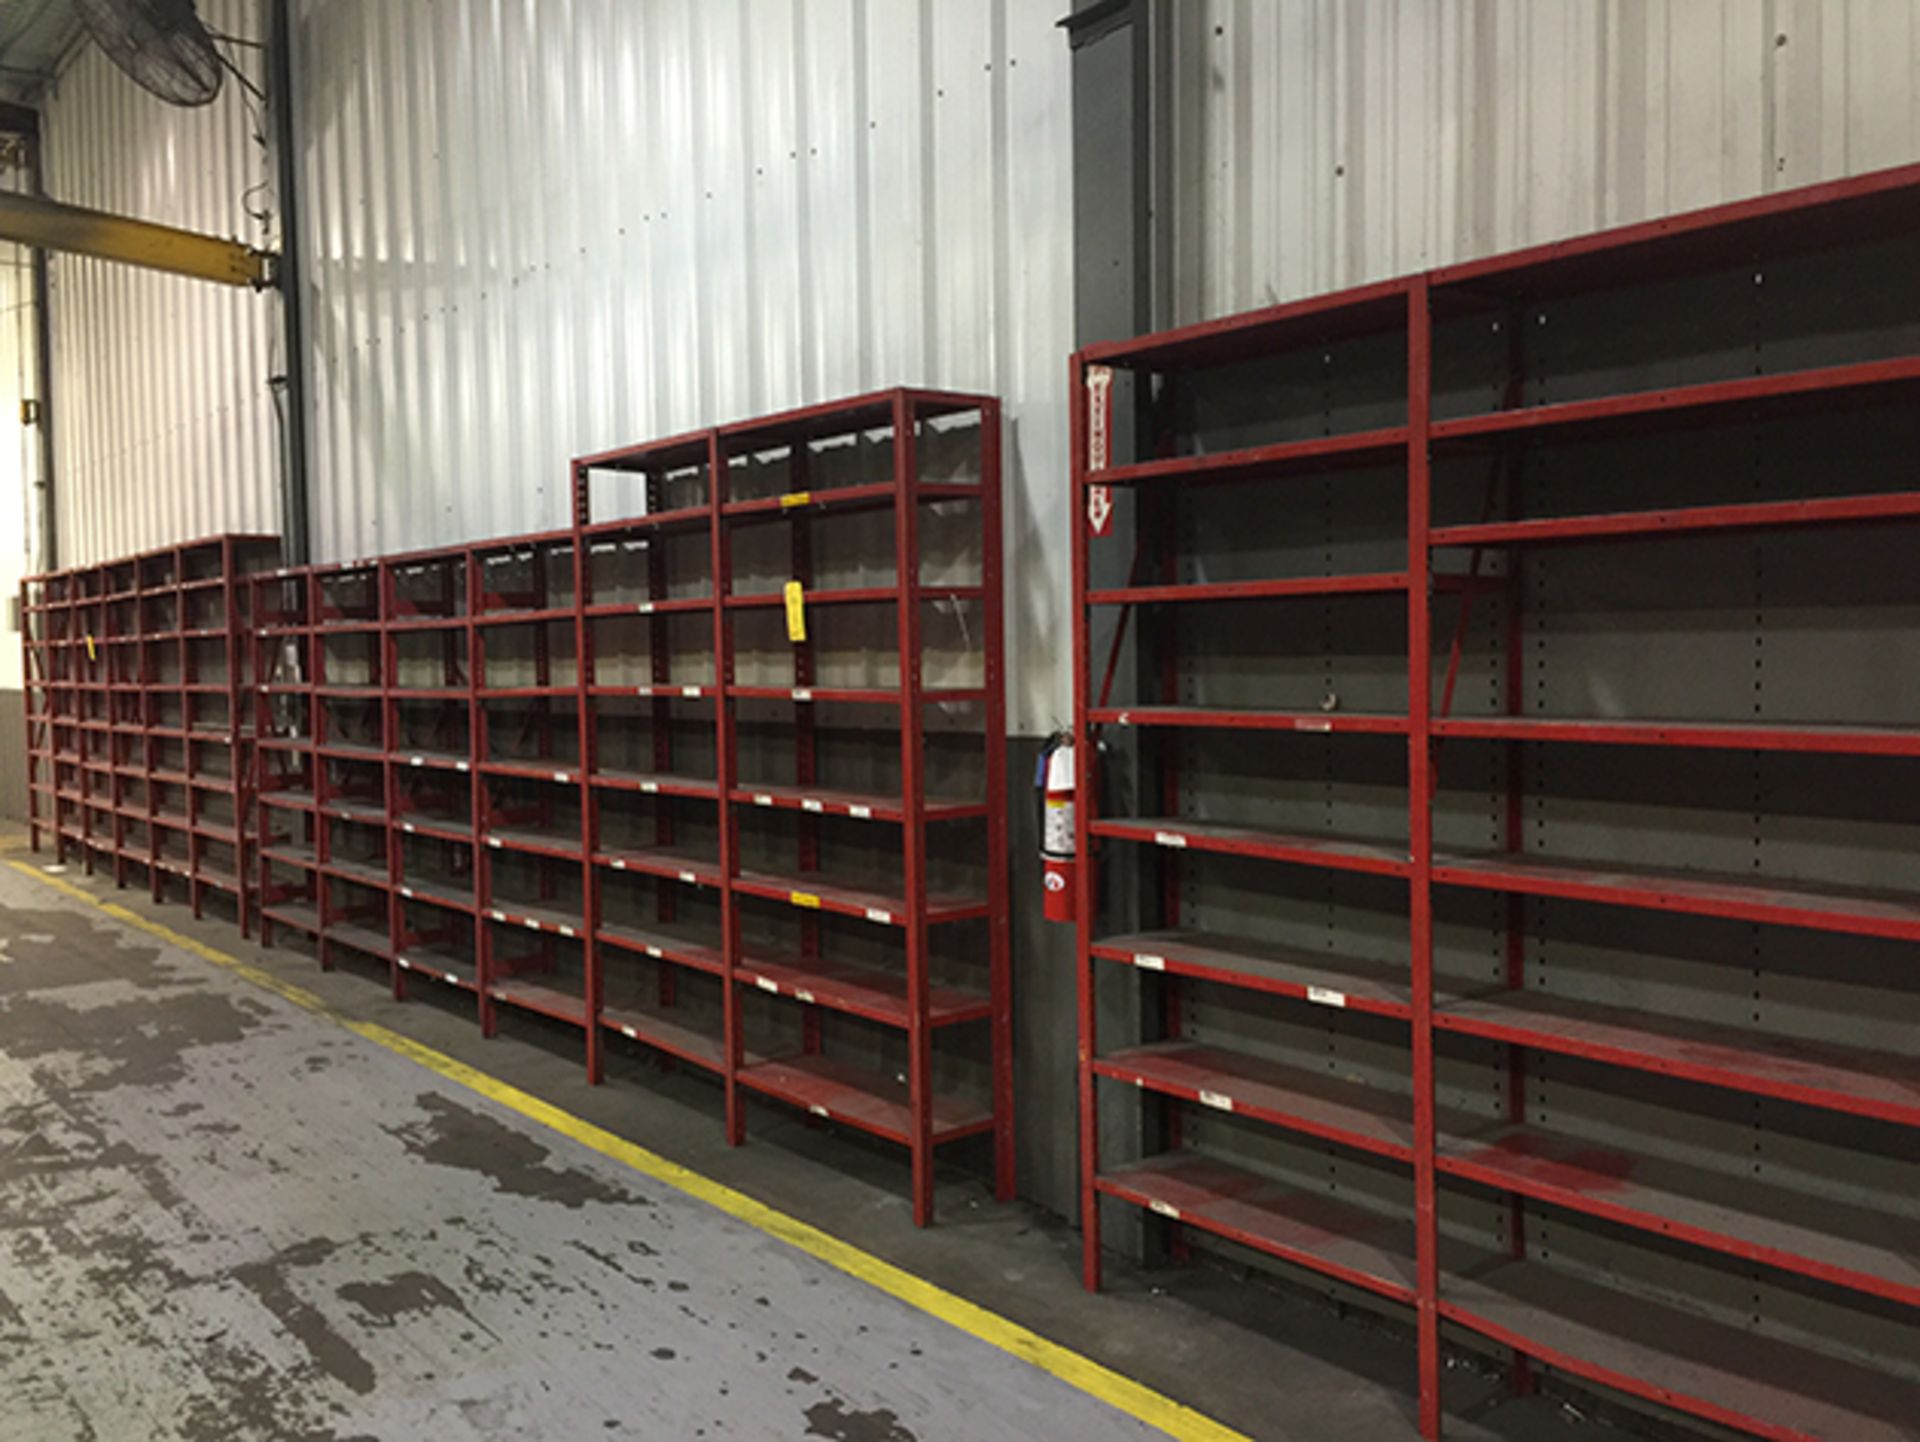 Lot of Shelving (Red)